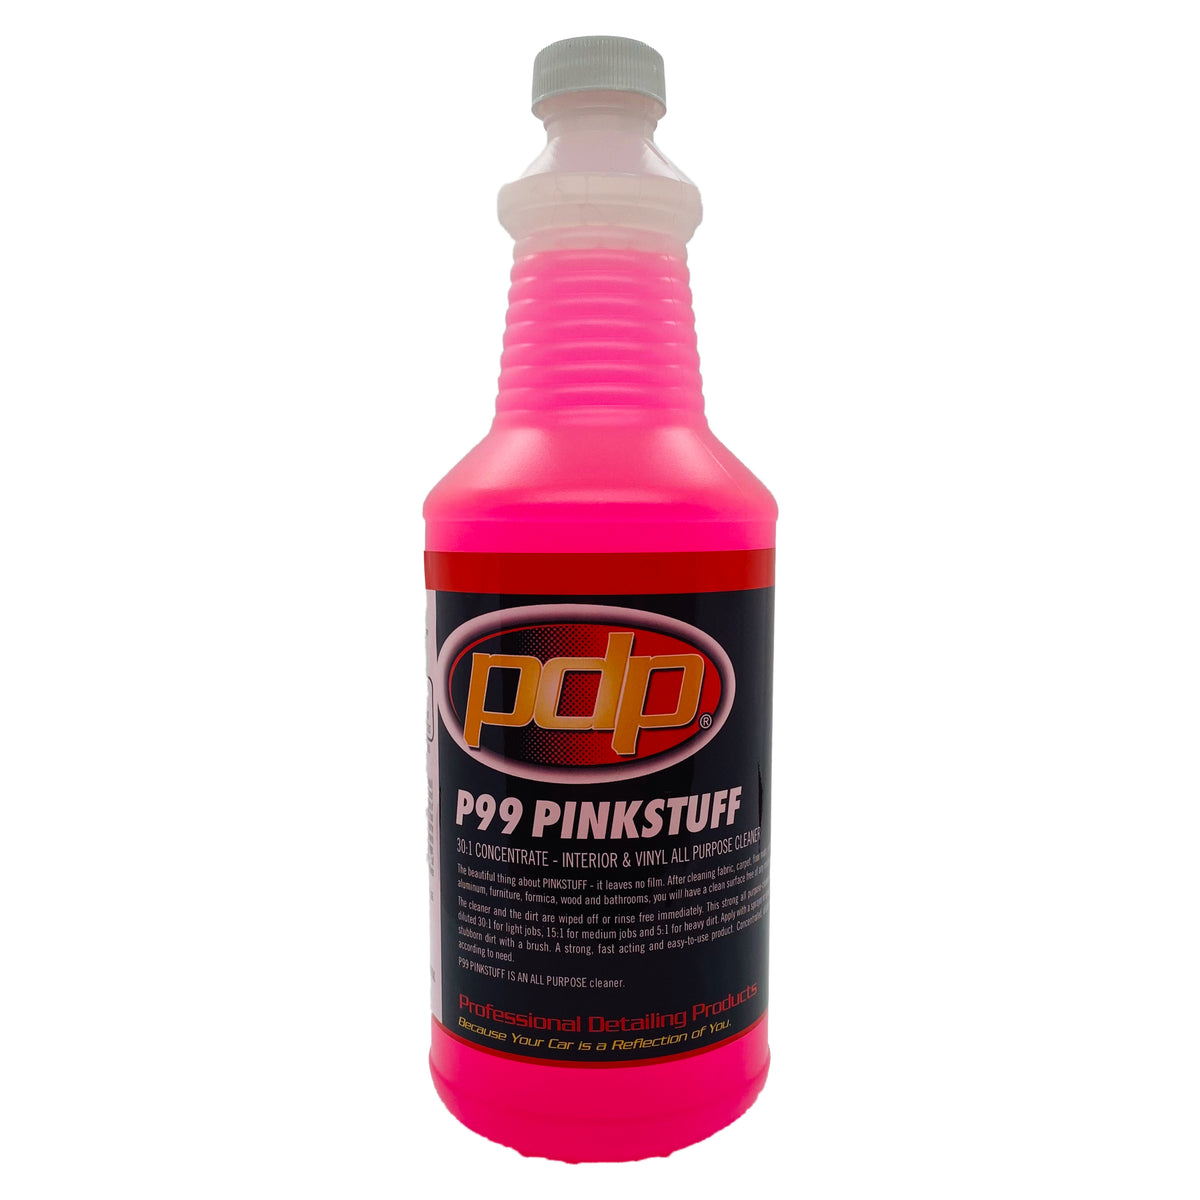 The pink stuff cleaner • Compare & see prices now »